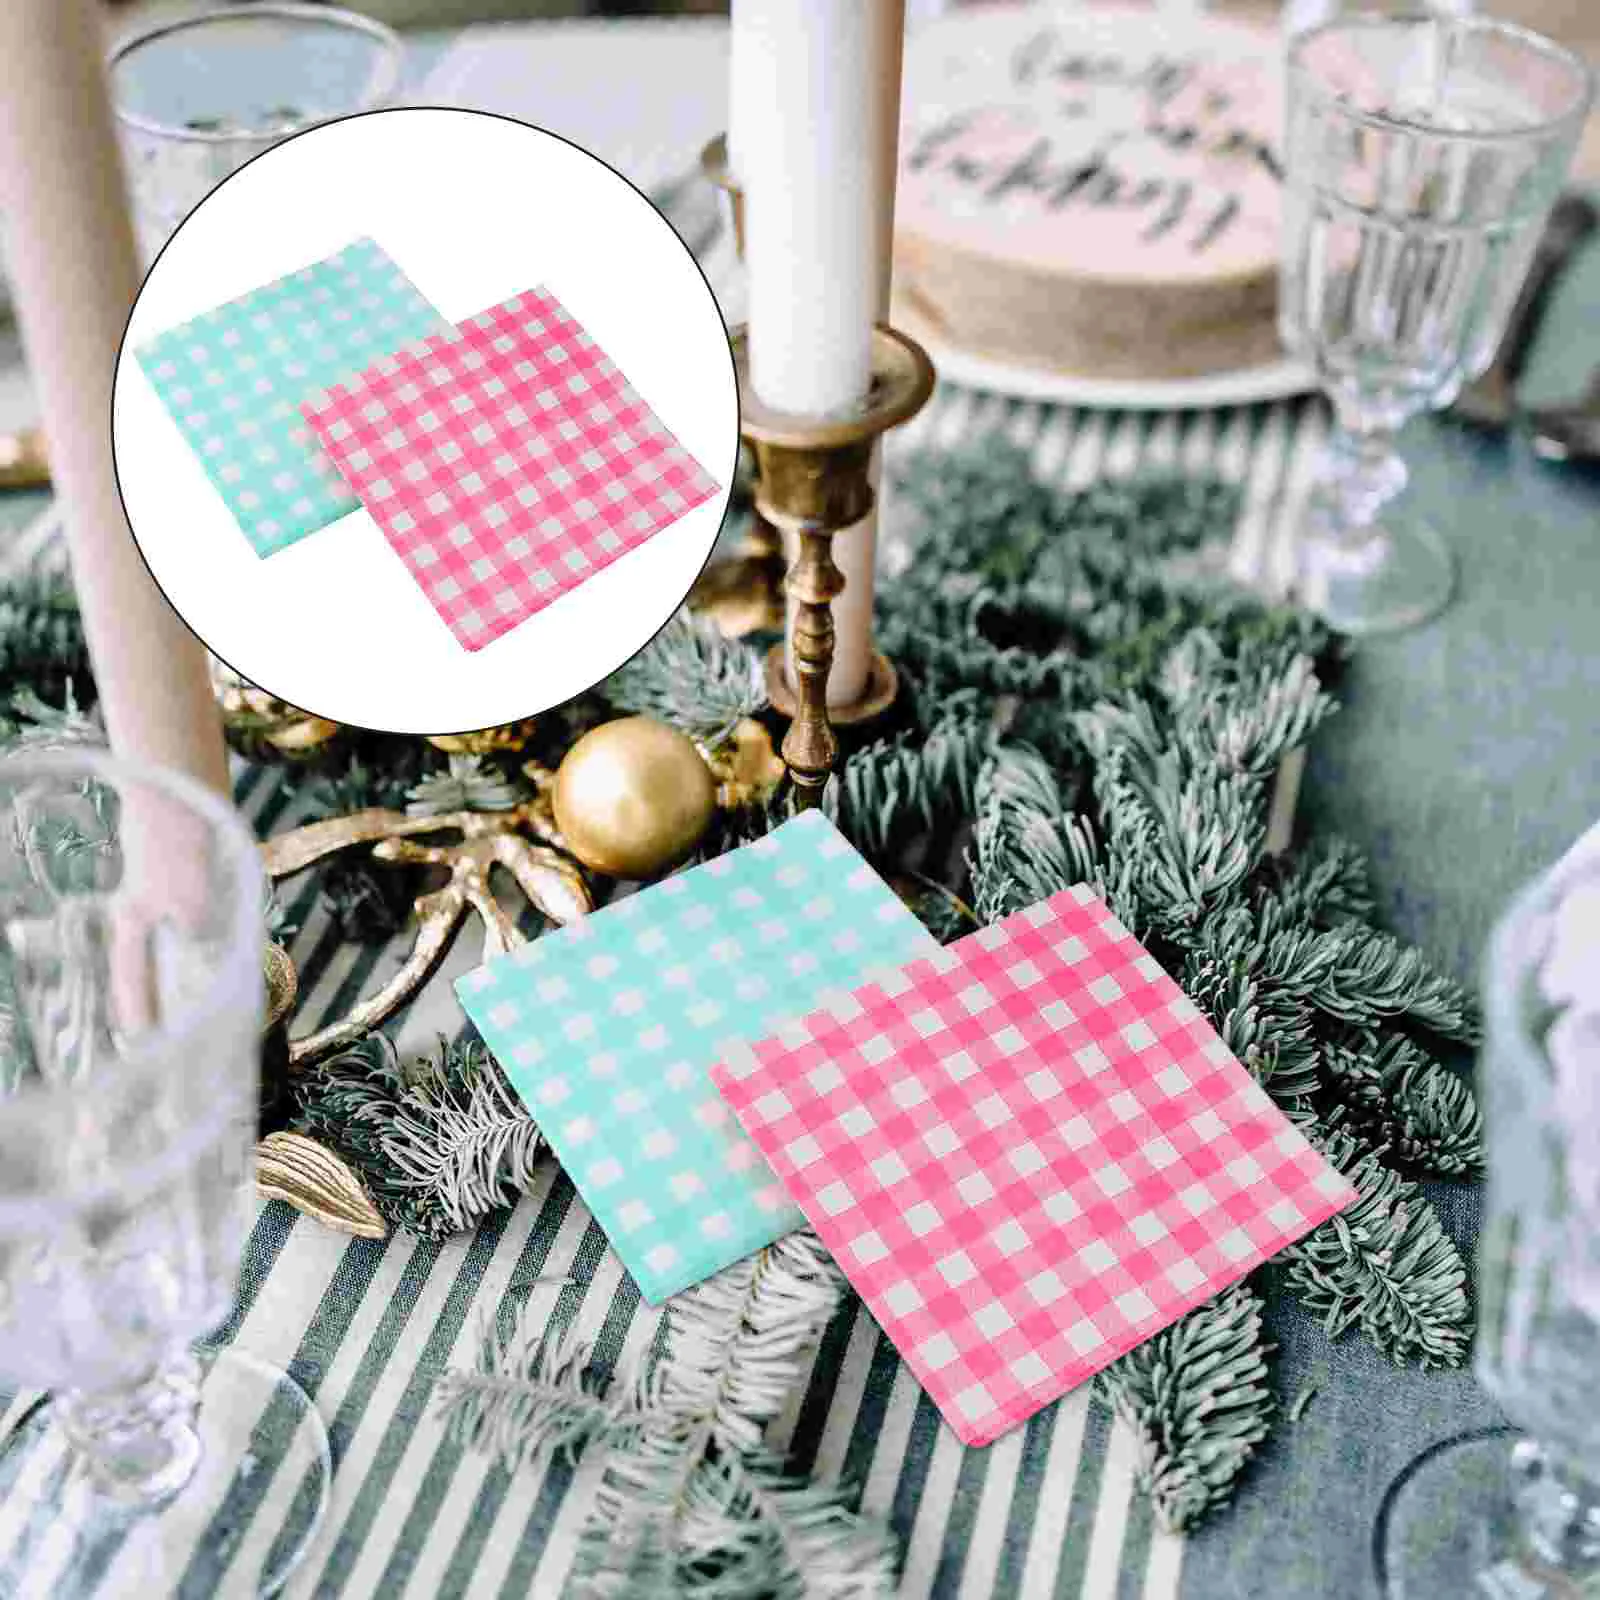 

80 Pcs Paper Napkin Grid Printing Napkins Party Decoration Tissue Disposable Supply Dining Table Home Picnic